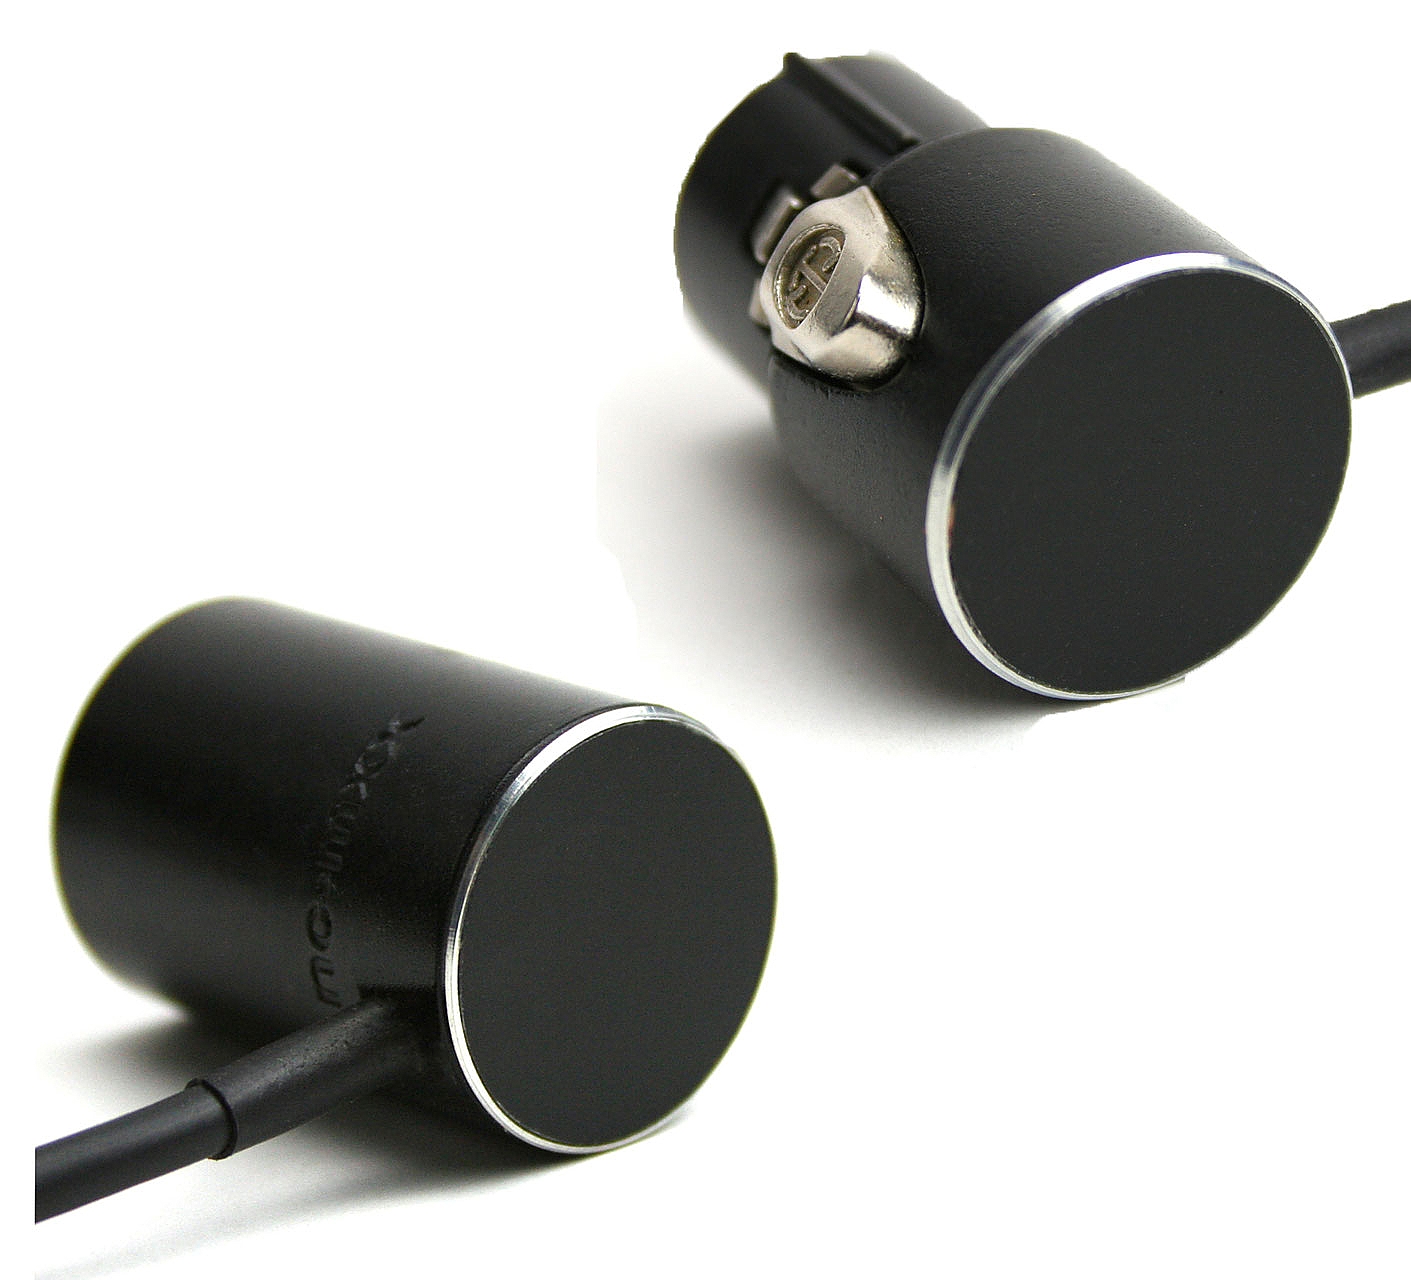 OPS - Compact XLR cable with angled connectors